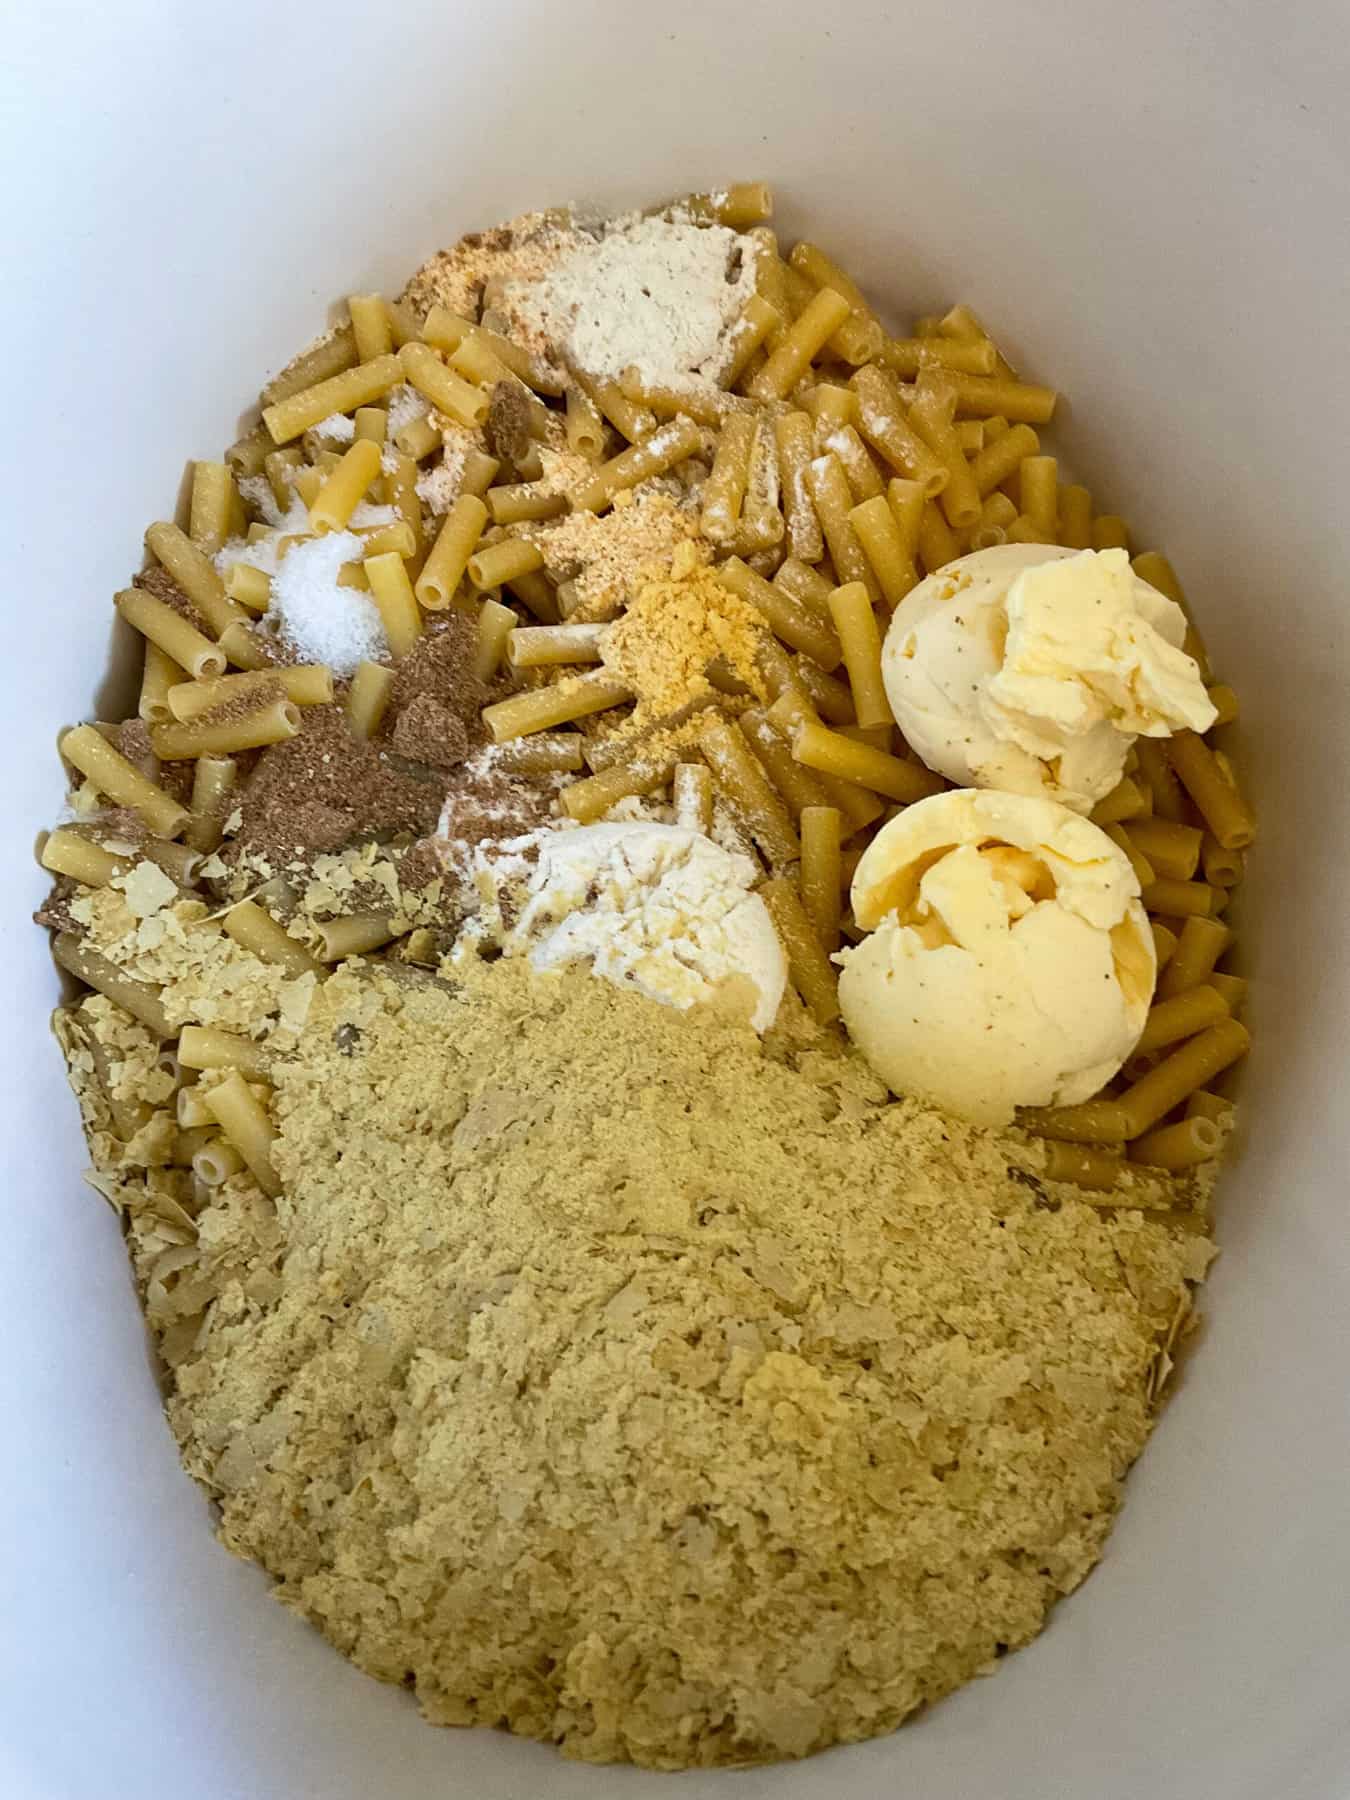 Ingredients added to slow cooker with the macaroni.